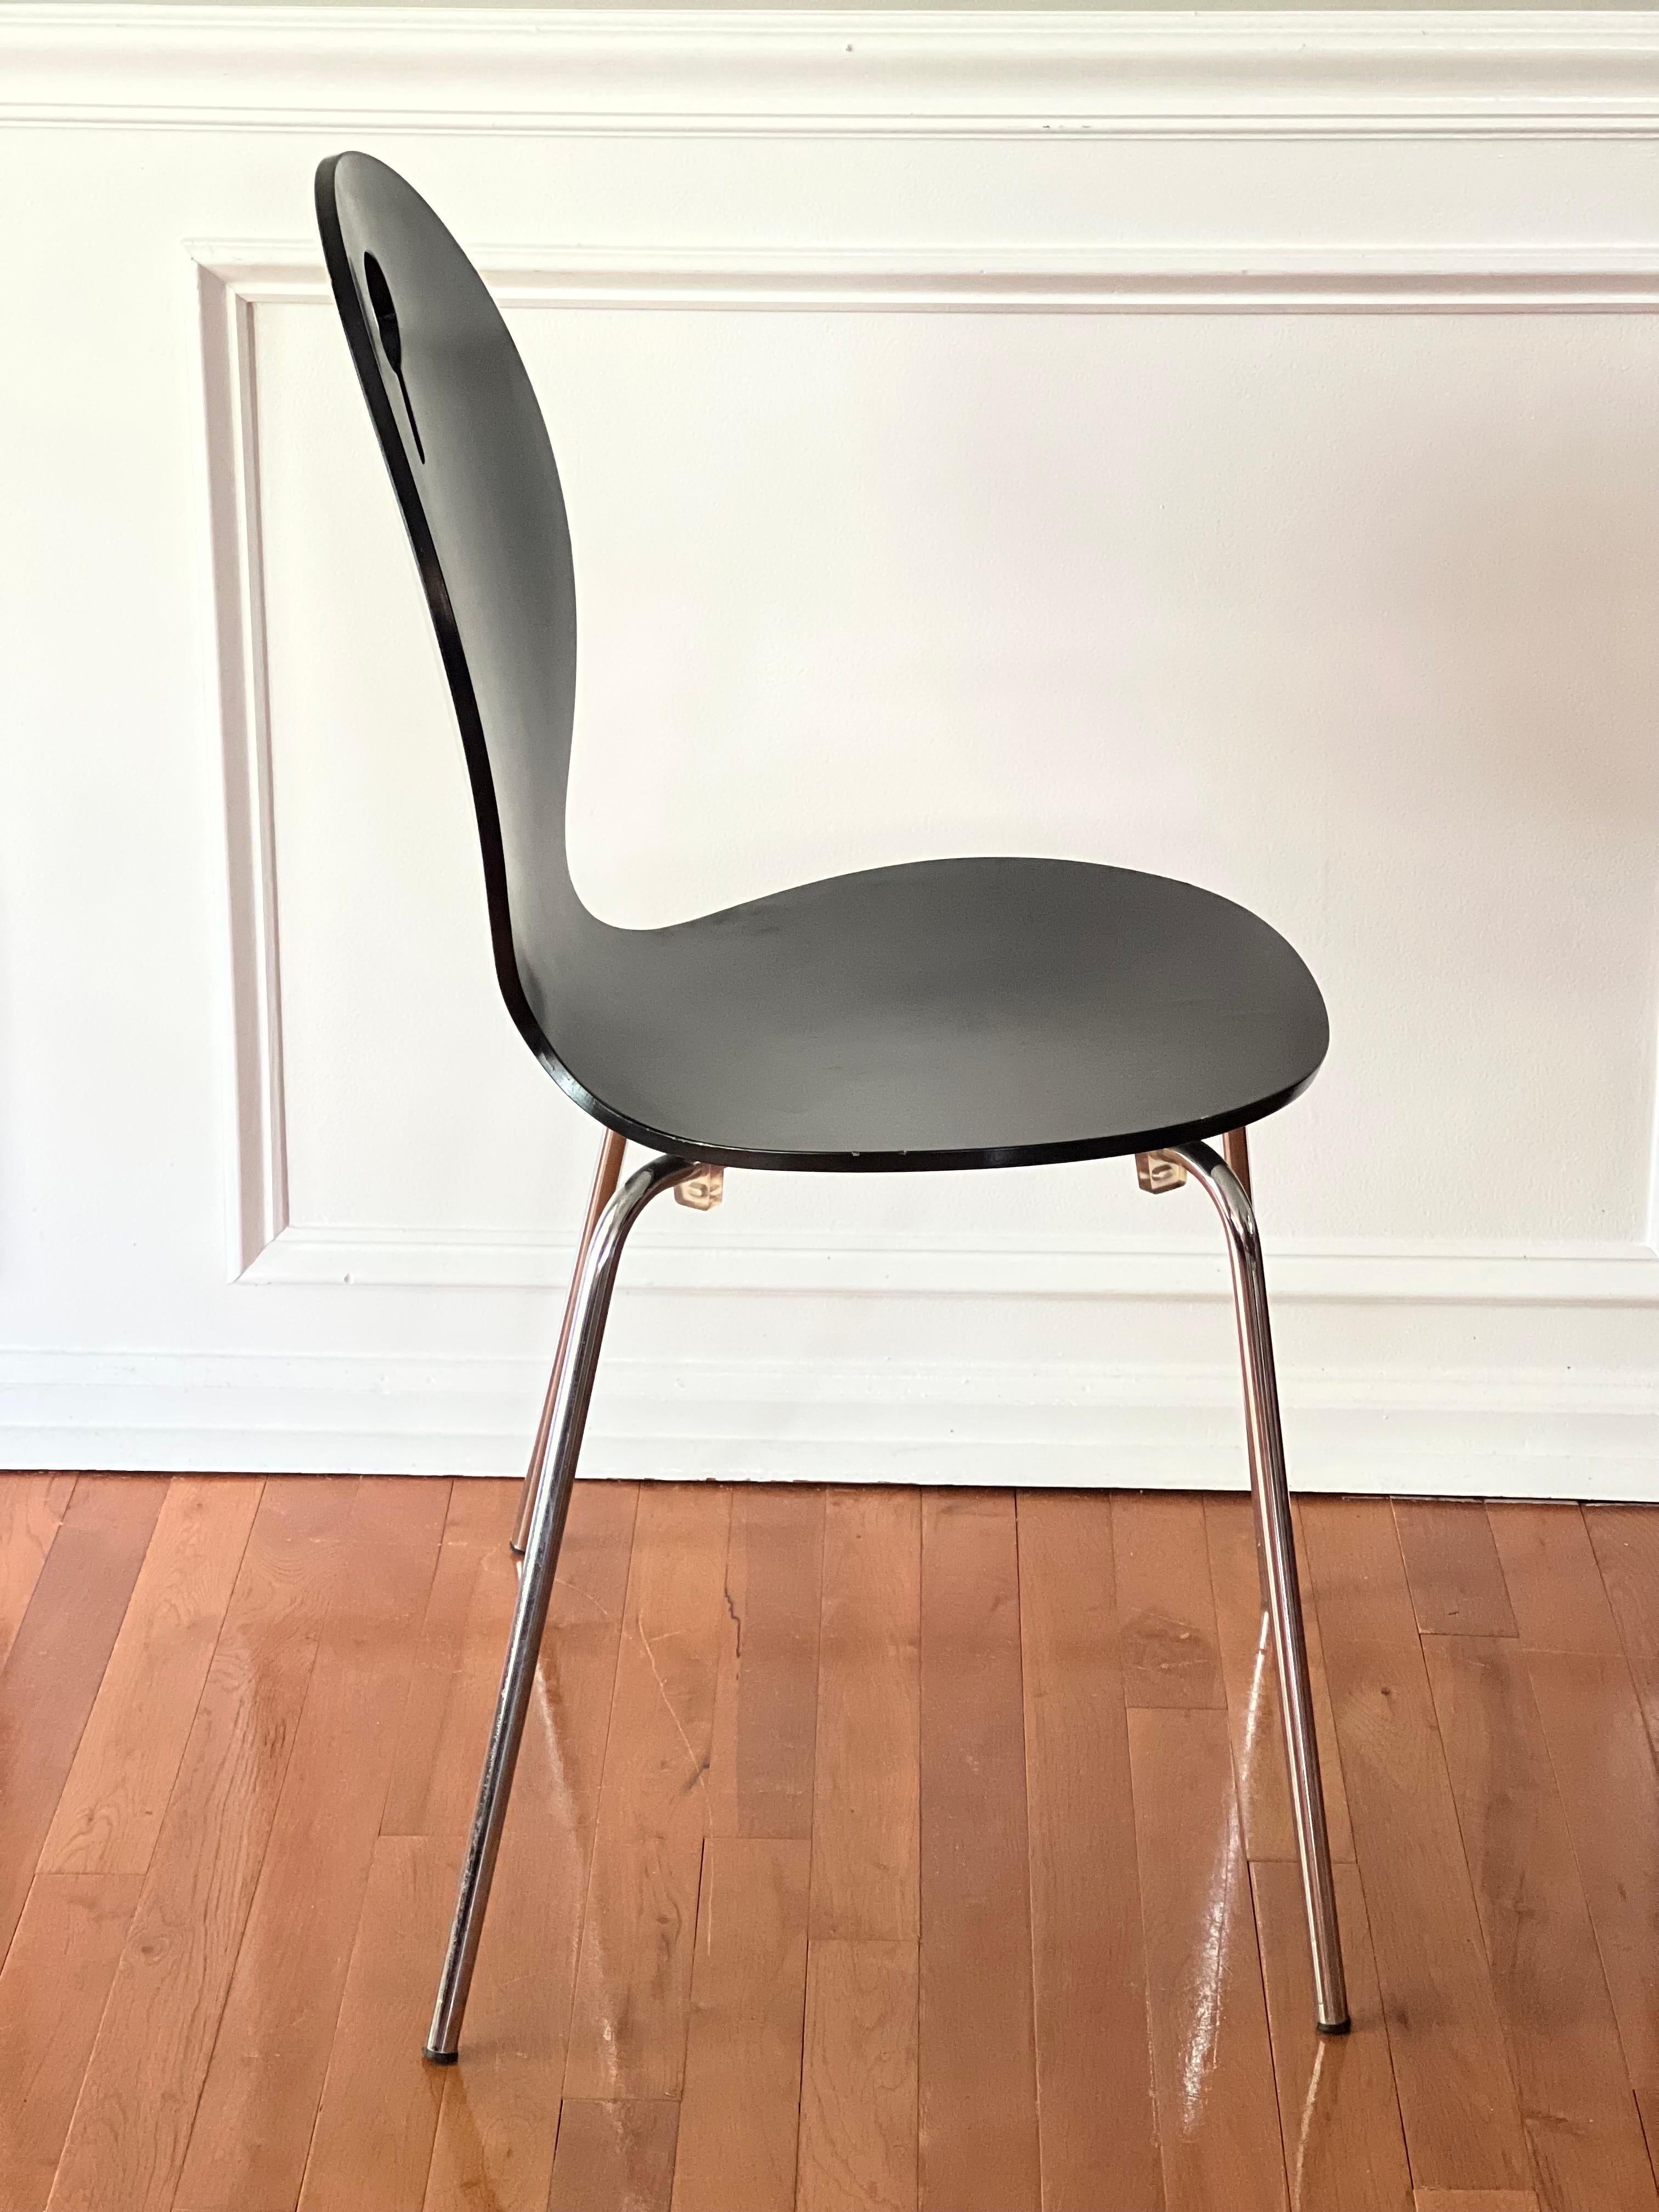 Vintage Italian Modern Bentwood Stackable Chairs by Calligaris, Set of 4 For Sale 3